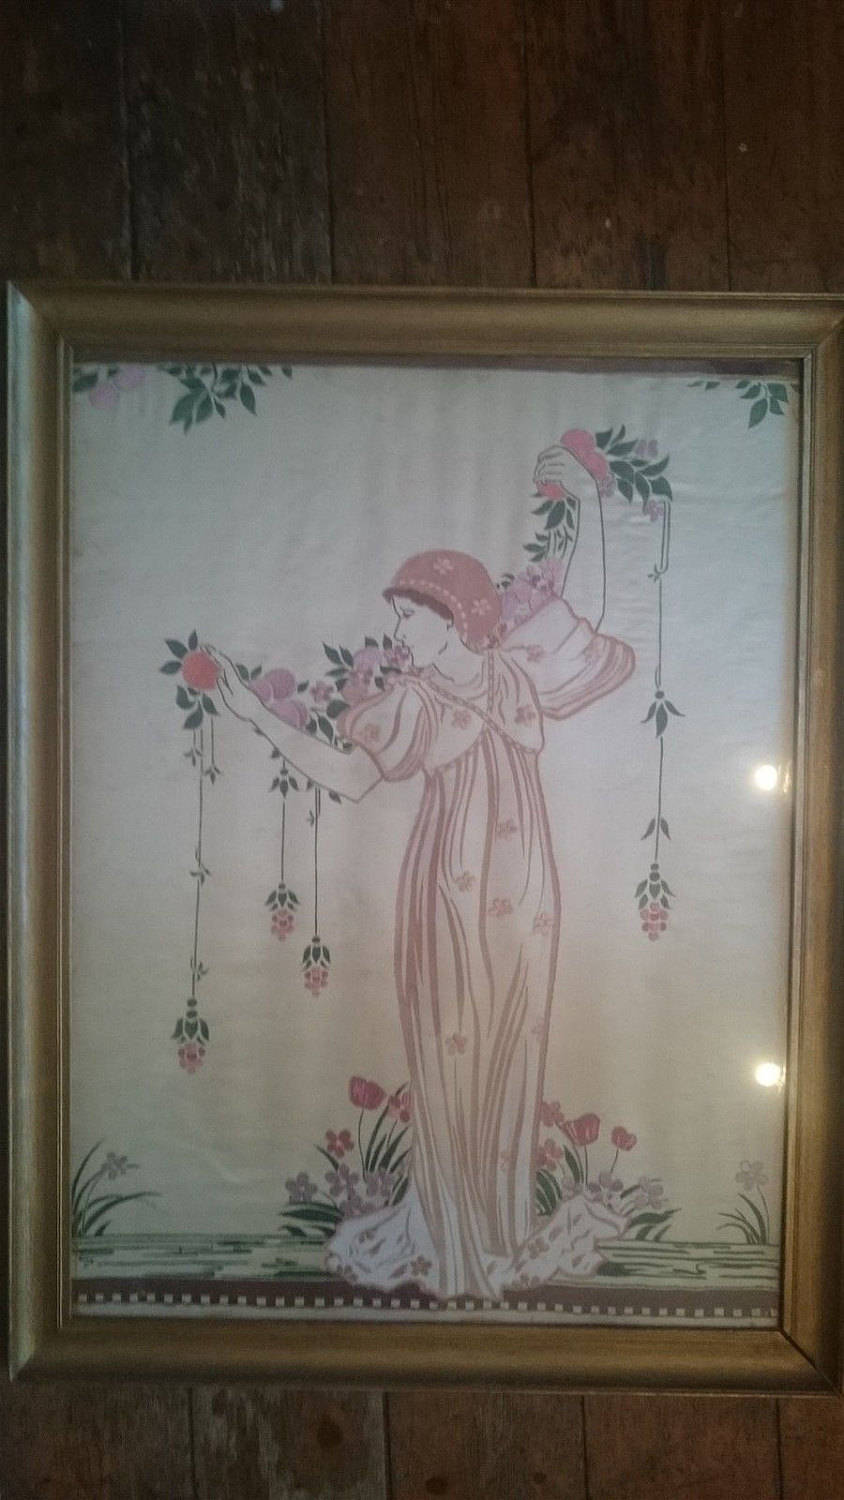 Antique Arts and Crafts Art Nouveau Lady Portrait Embroidery on Silk in Original Frame Hand Embroidered and Art Painting  Late 1800's